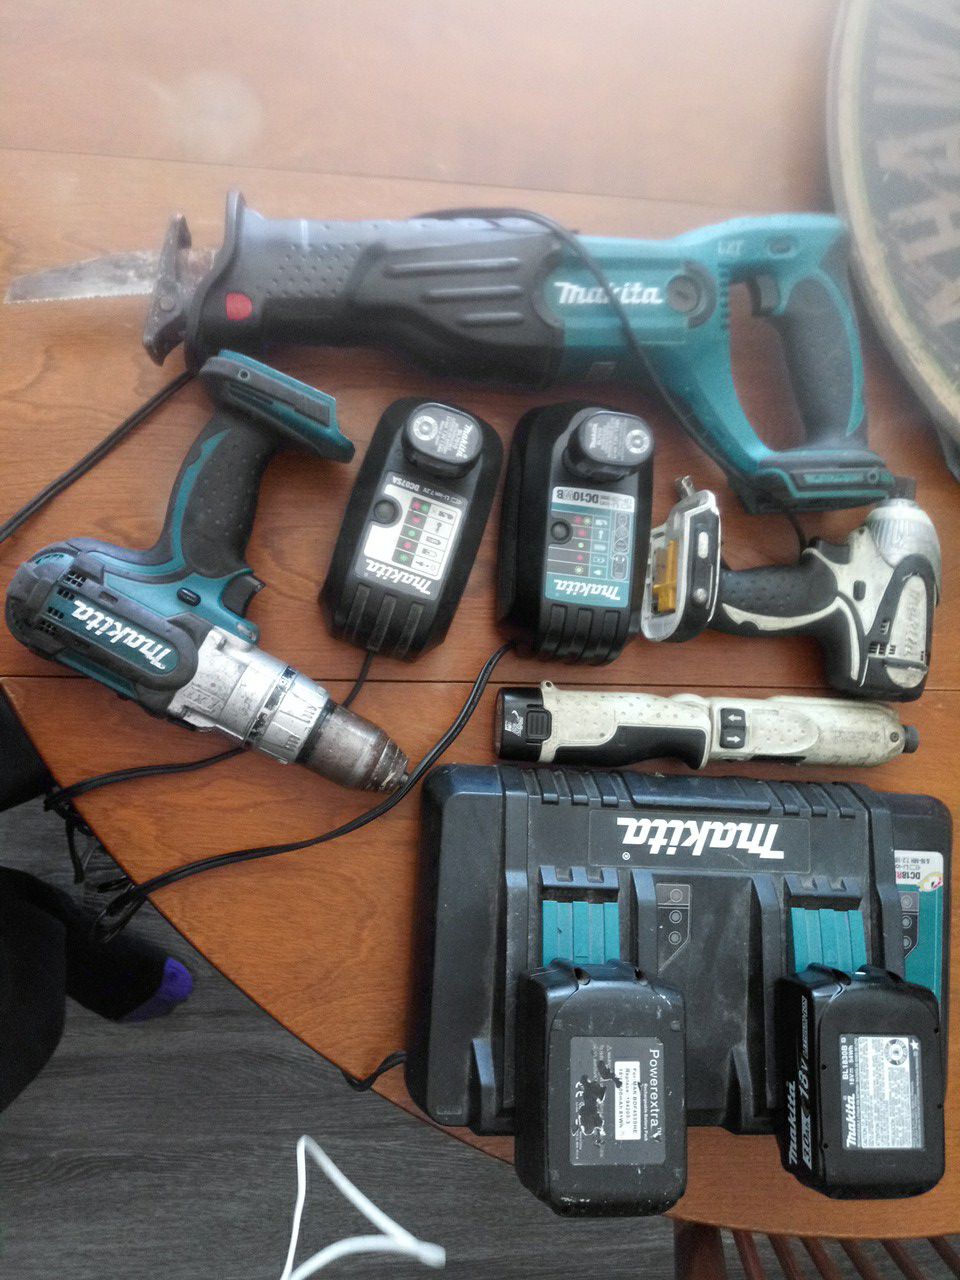 Makita drill,saw and screwdriver all wireless re chargable